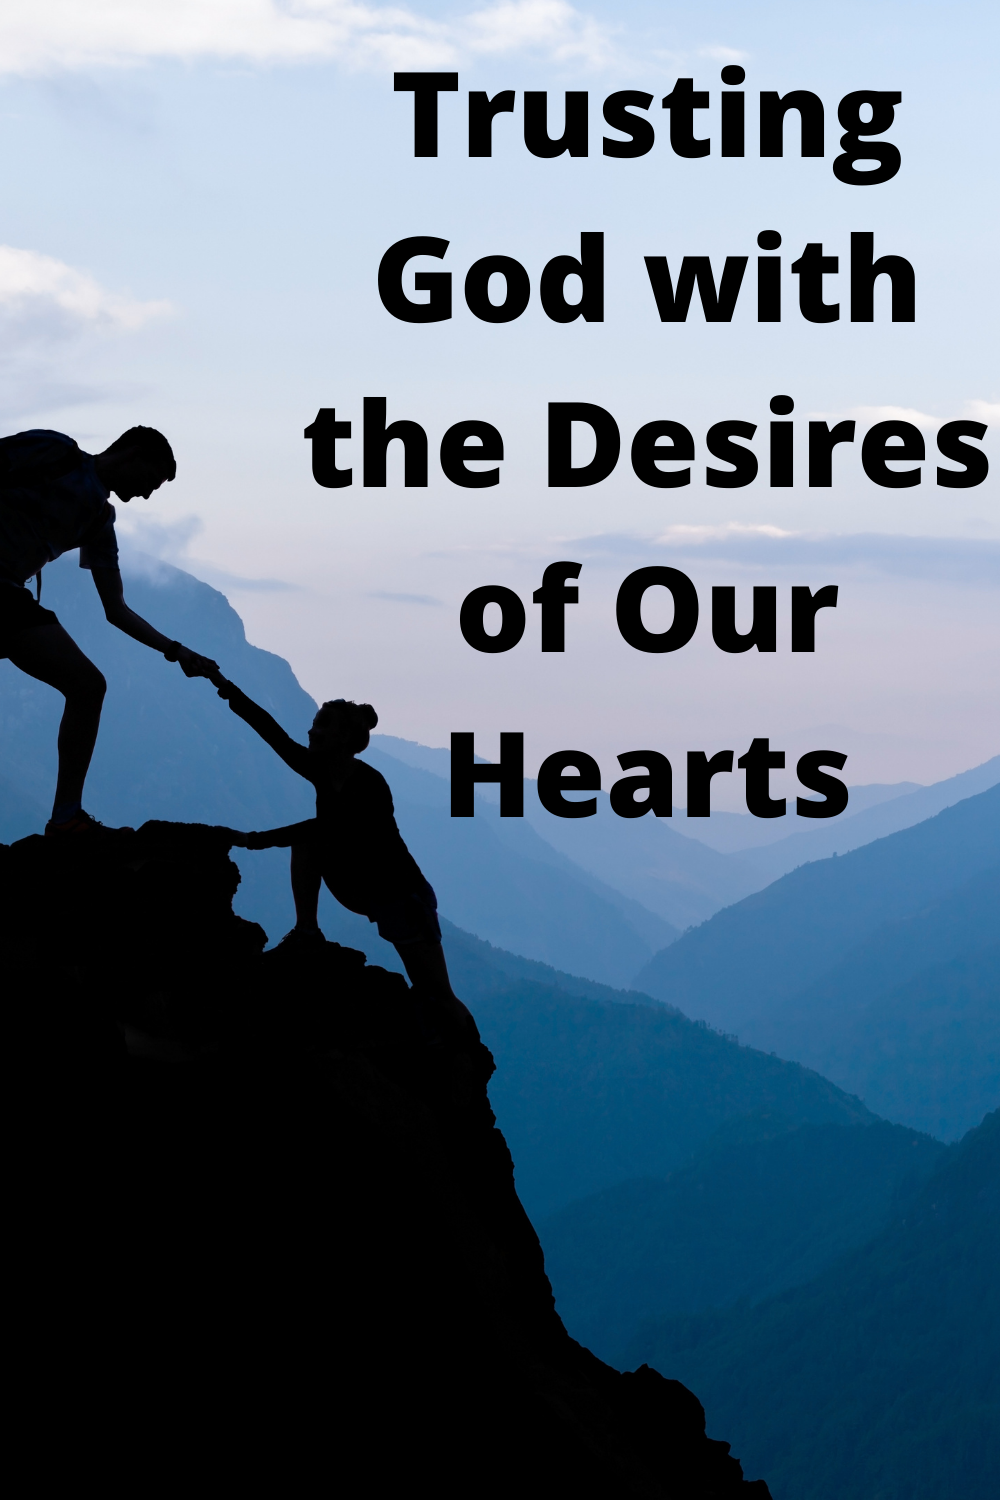 Trusting God with the Desires of Our Hearts ~ The Shepherd's Sheep